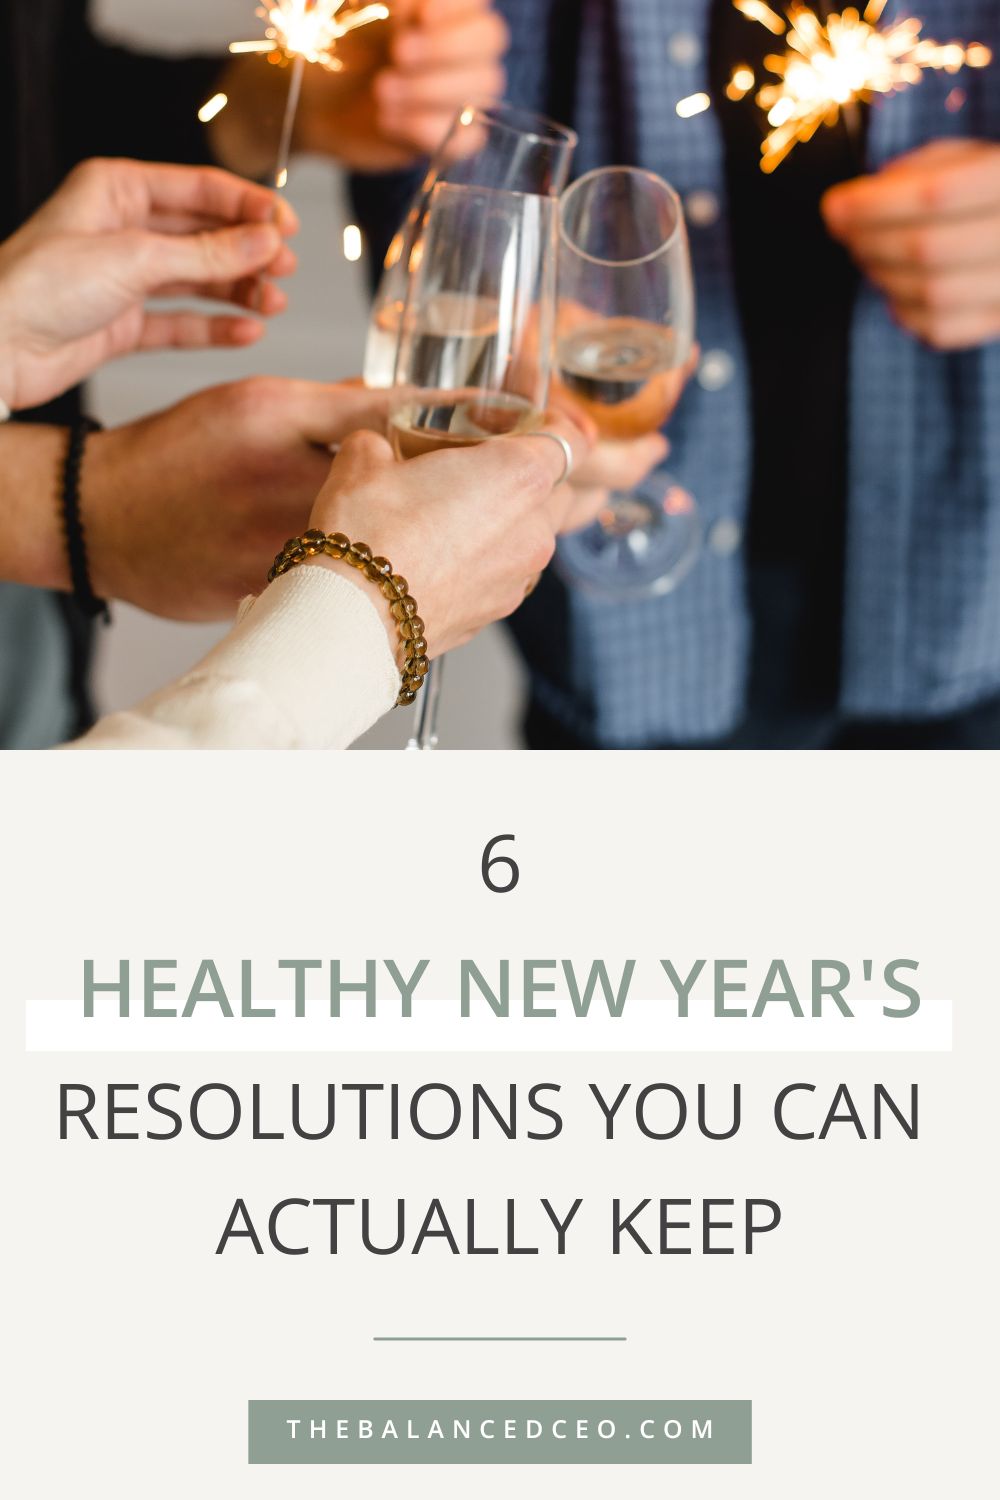 6 Healthy New Year’s Resolutions You Can Actually Keep